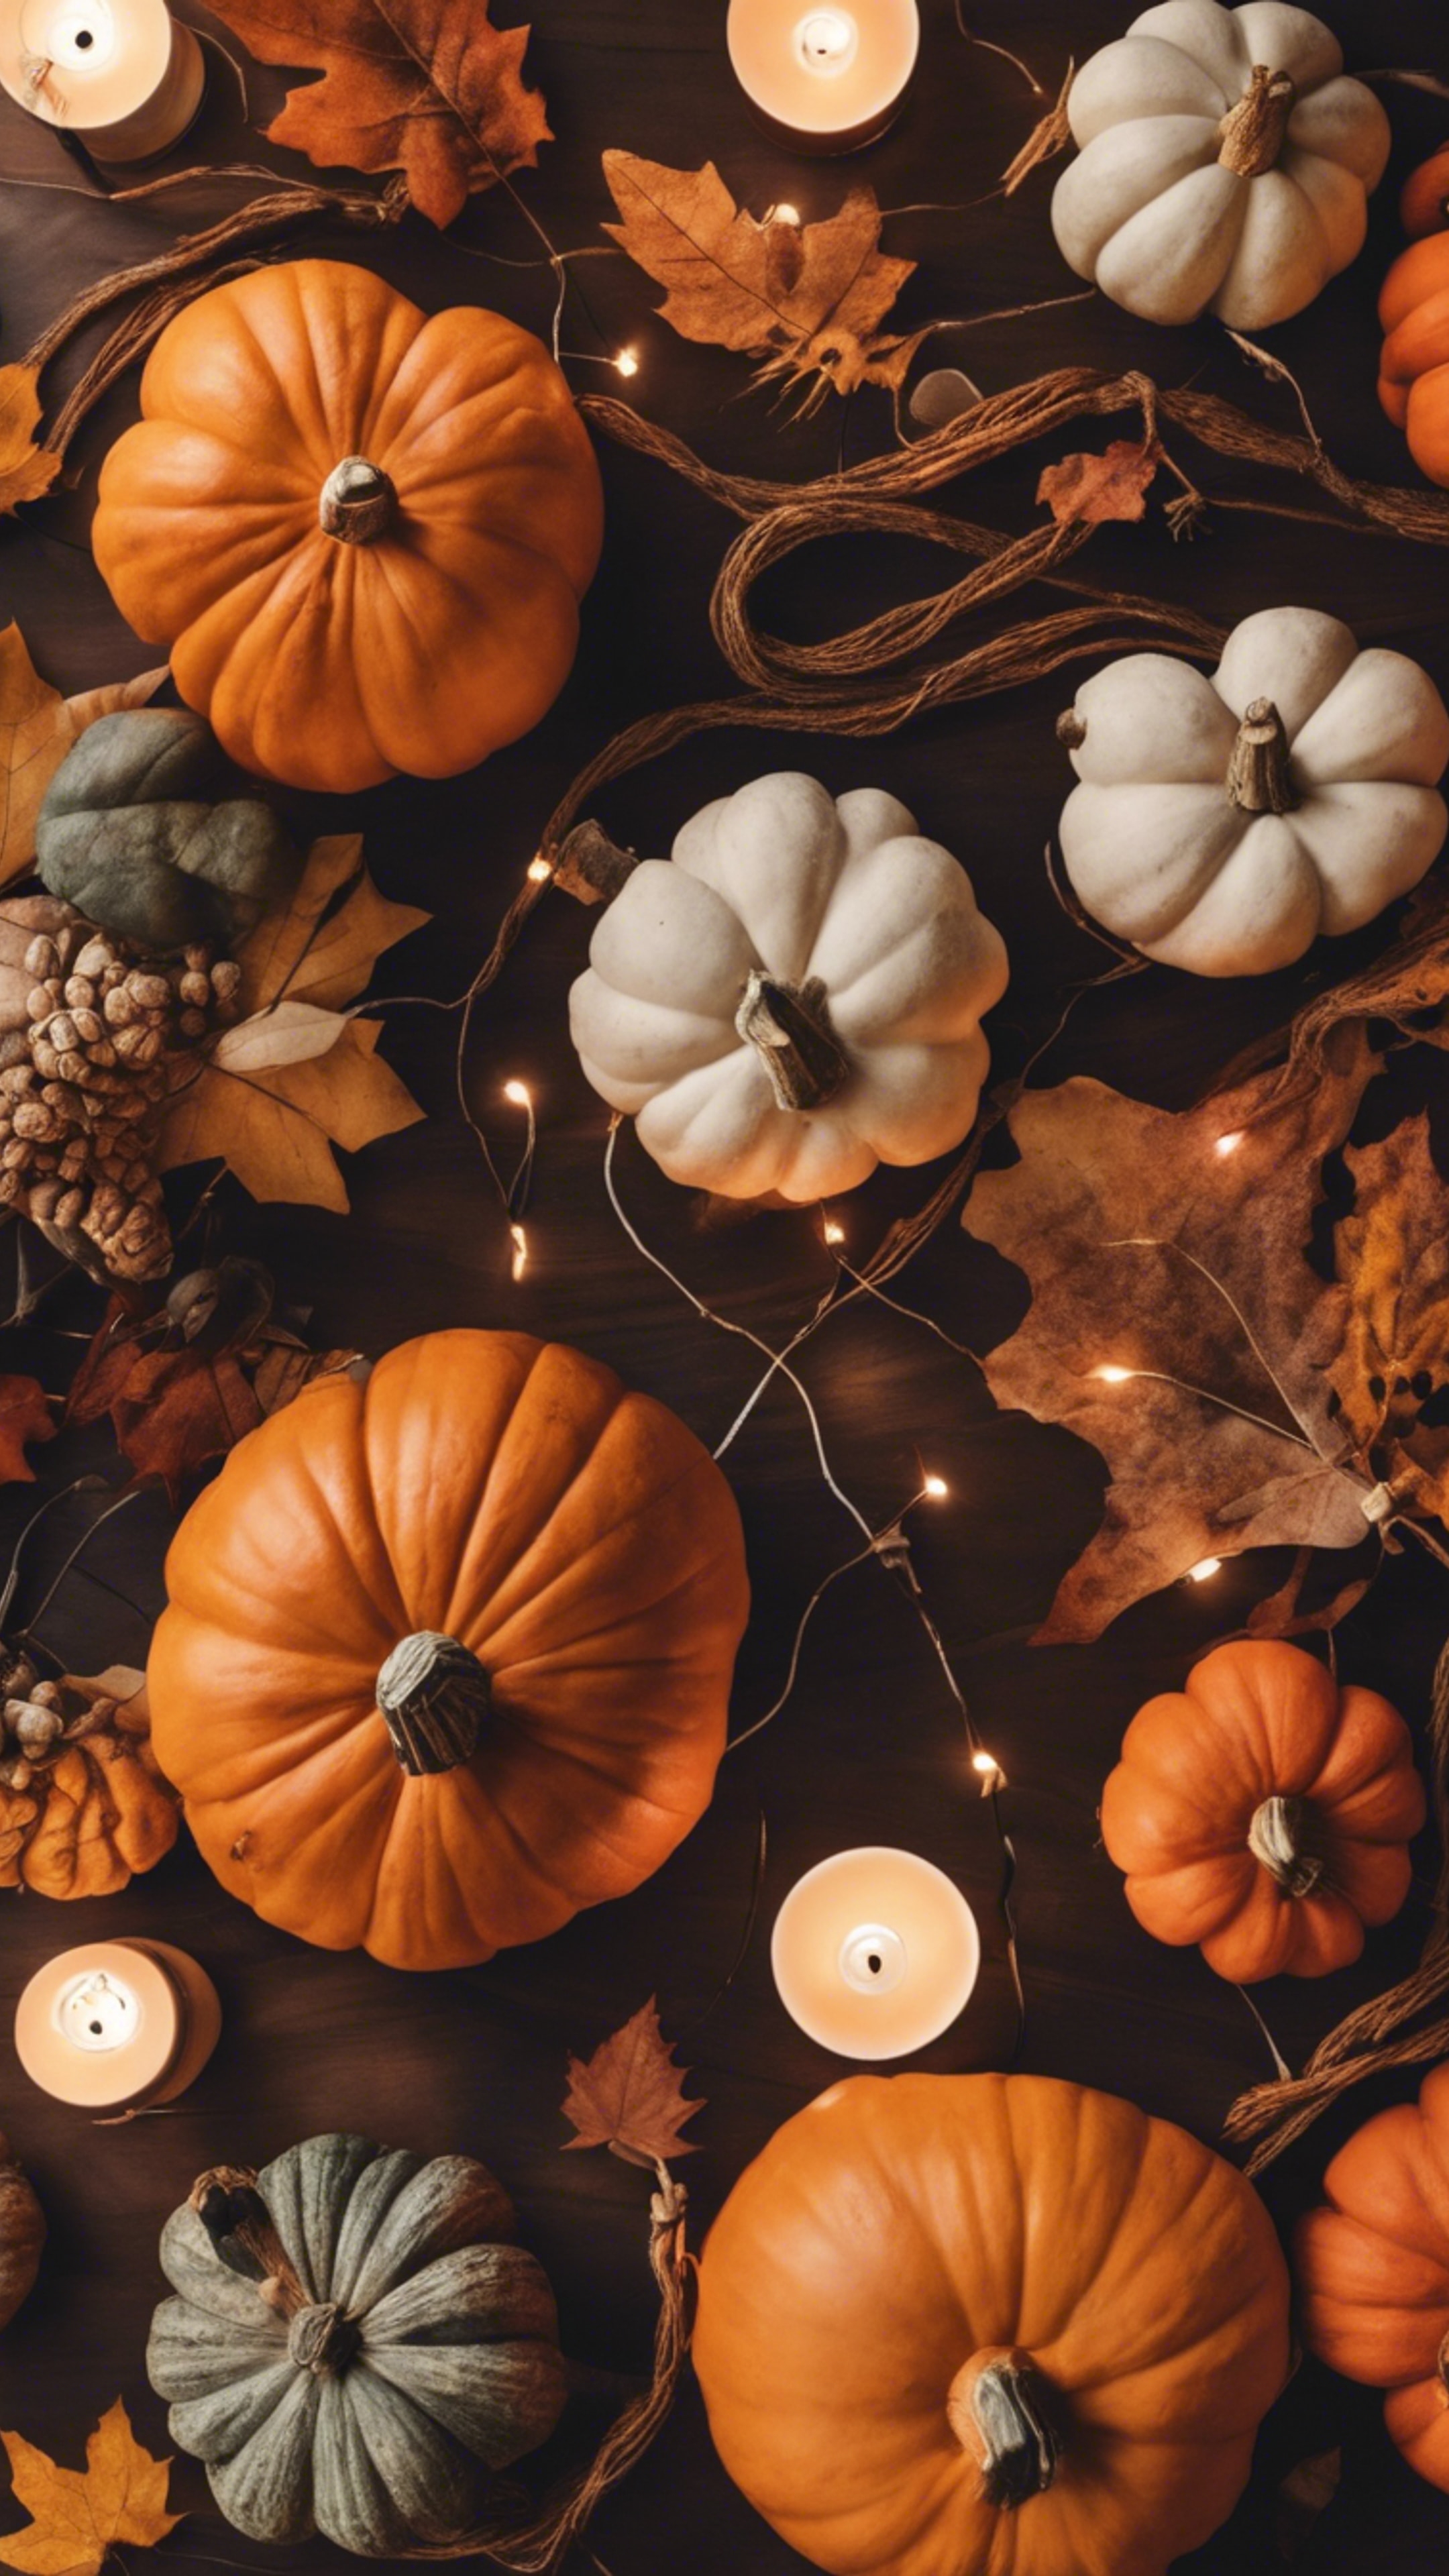 An aesthetic flat lay of Thanksgiving decor with a variety of mini pumpkins, autumn leaves, and Instagram-worthy string lights.壁紙[d51b0c371dfc4f6d8d4a]